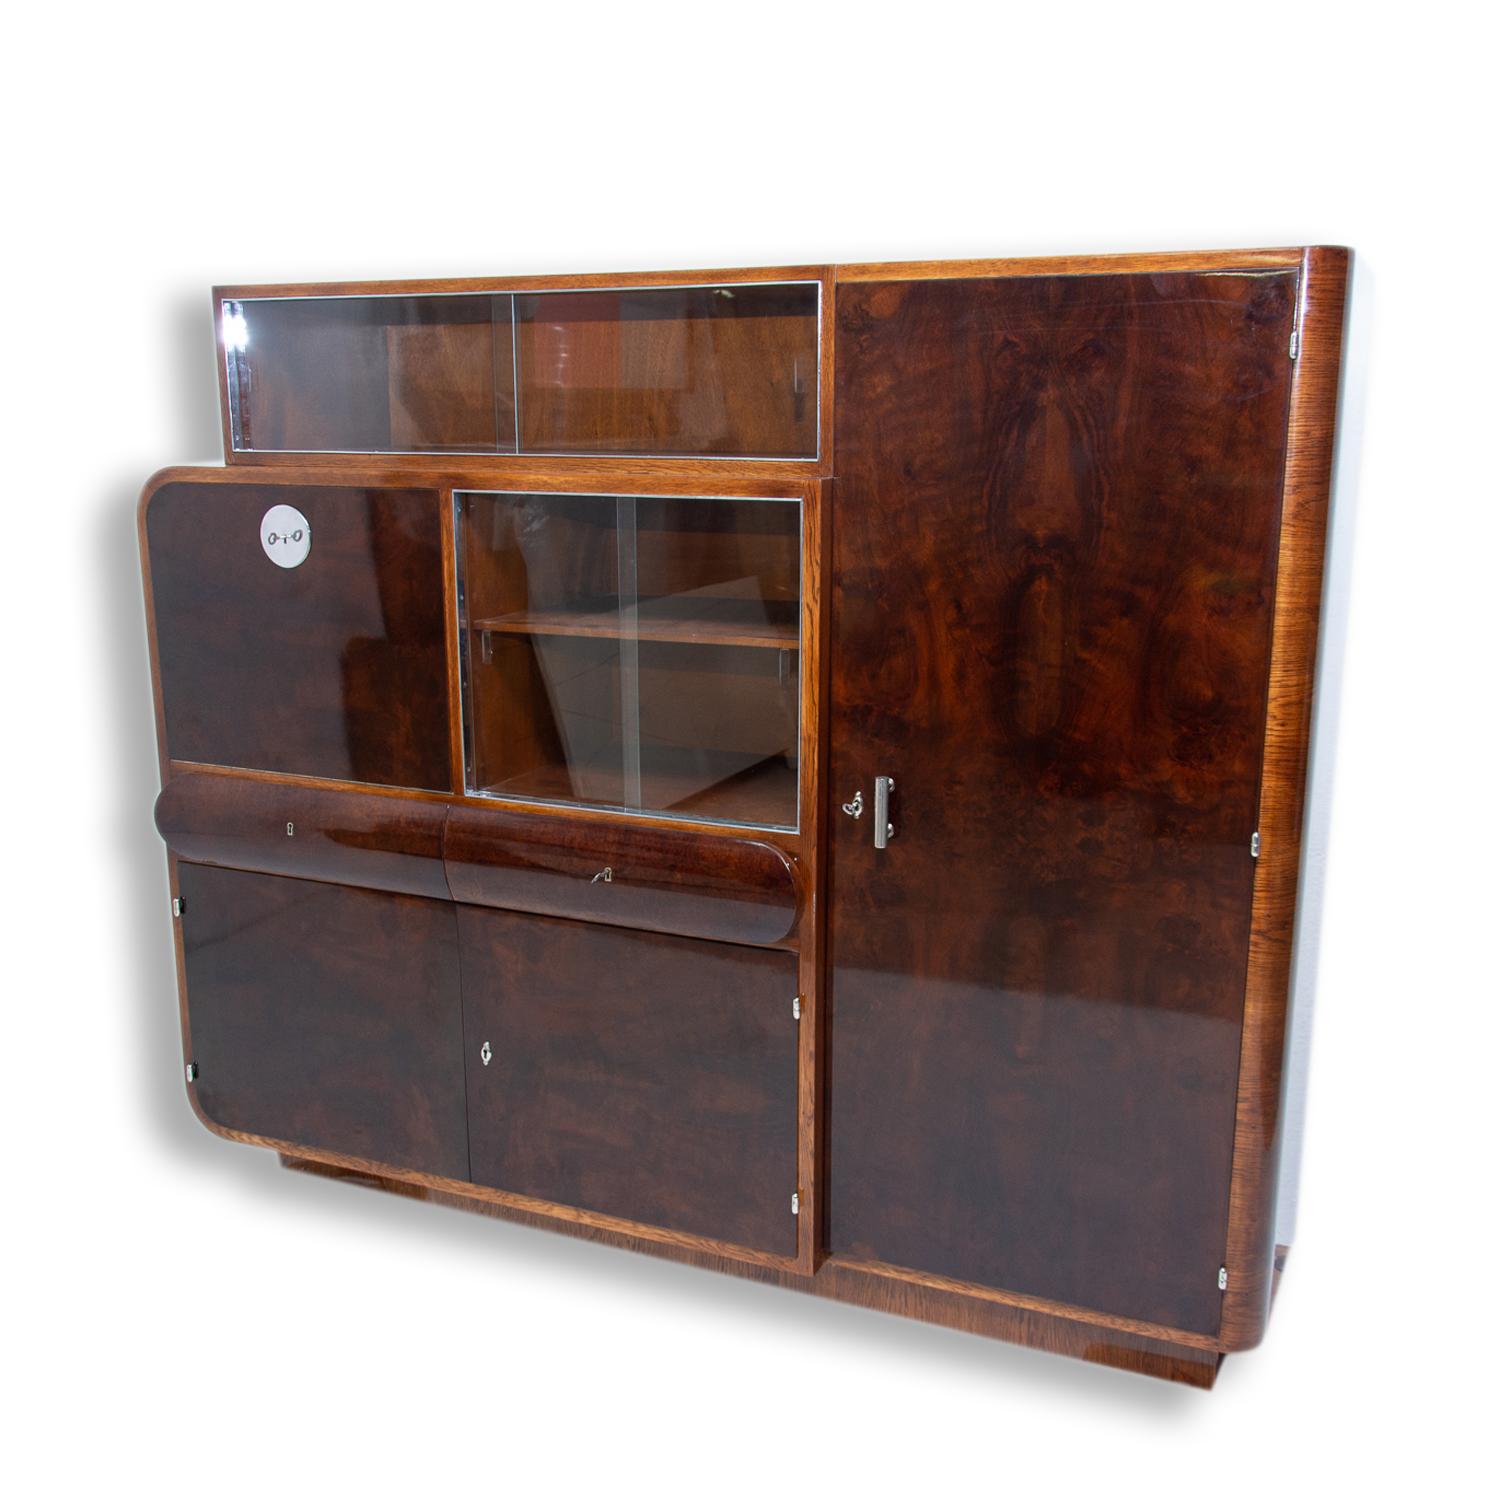 Bauhaus Art Deco oval cabinet. It can be used as a showcase, bookcase or sideboard. It was made in Bohemia in the 1930s. It was made by Urban Company - Bohemian pre-war furniture company.
The cabinet features glazed upper and middle part that can